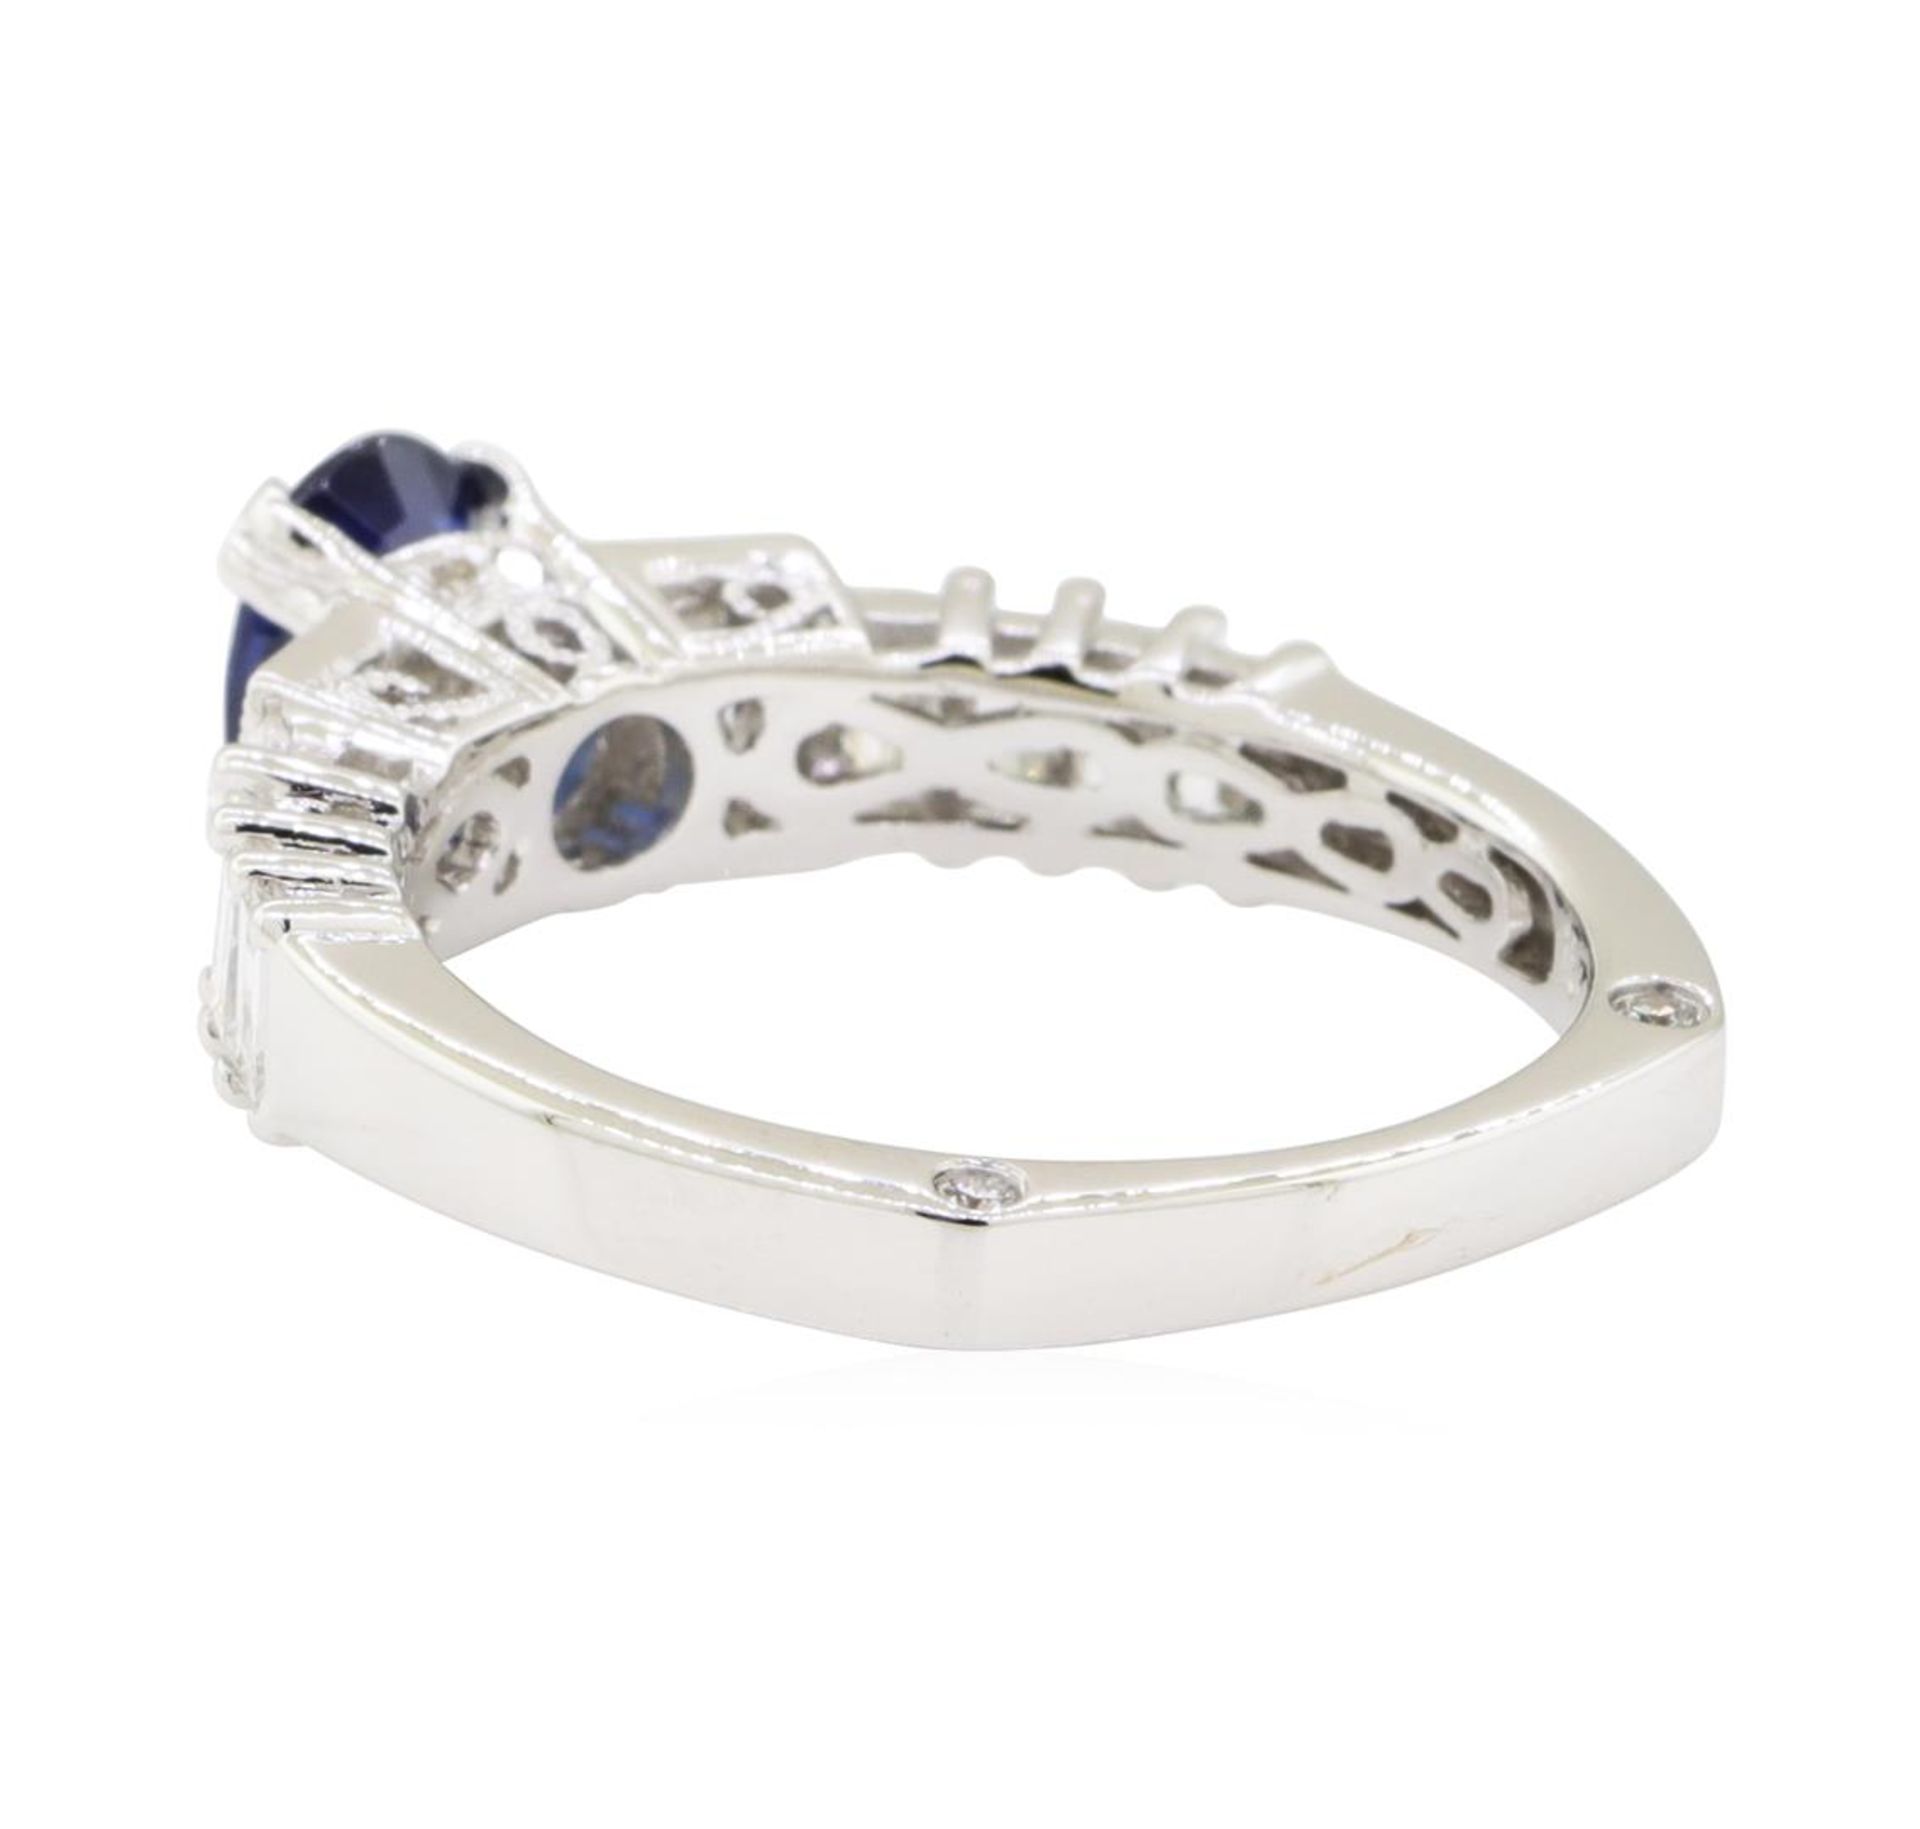 1.85 ctw Sapphire and Diamond Ring - 18KT White Gold - Image 3 of 5